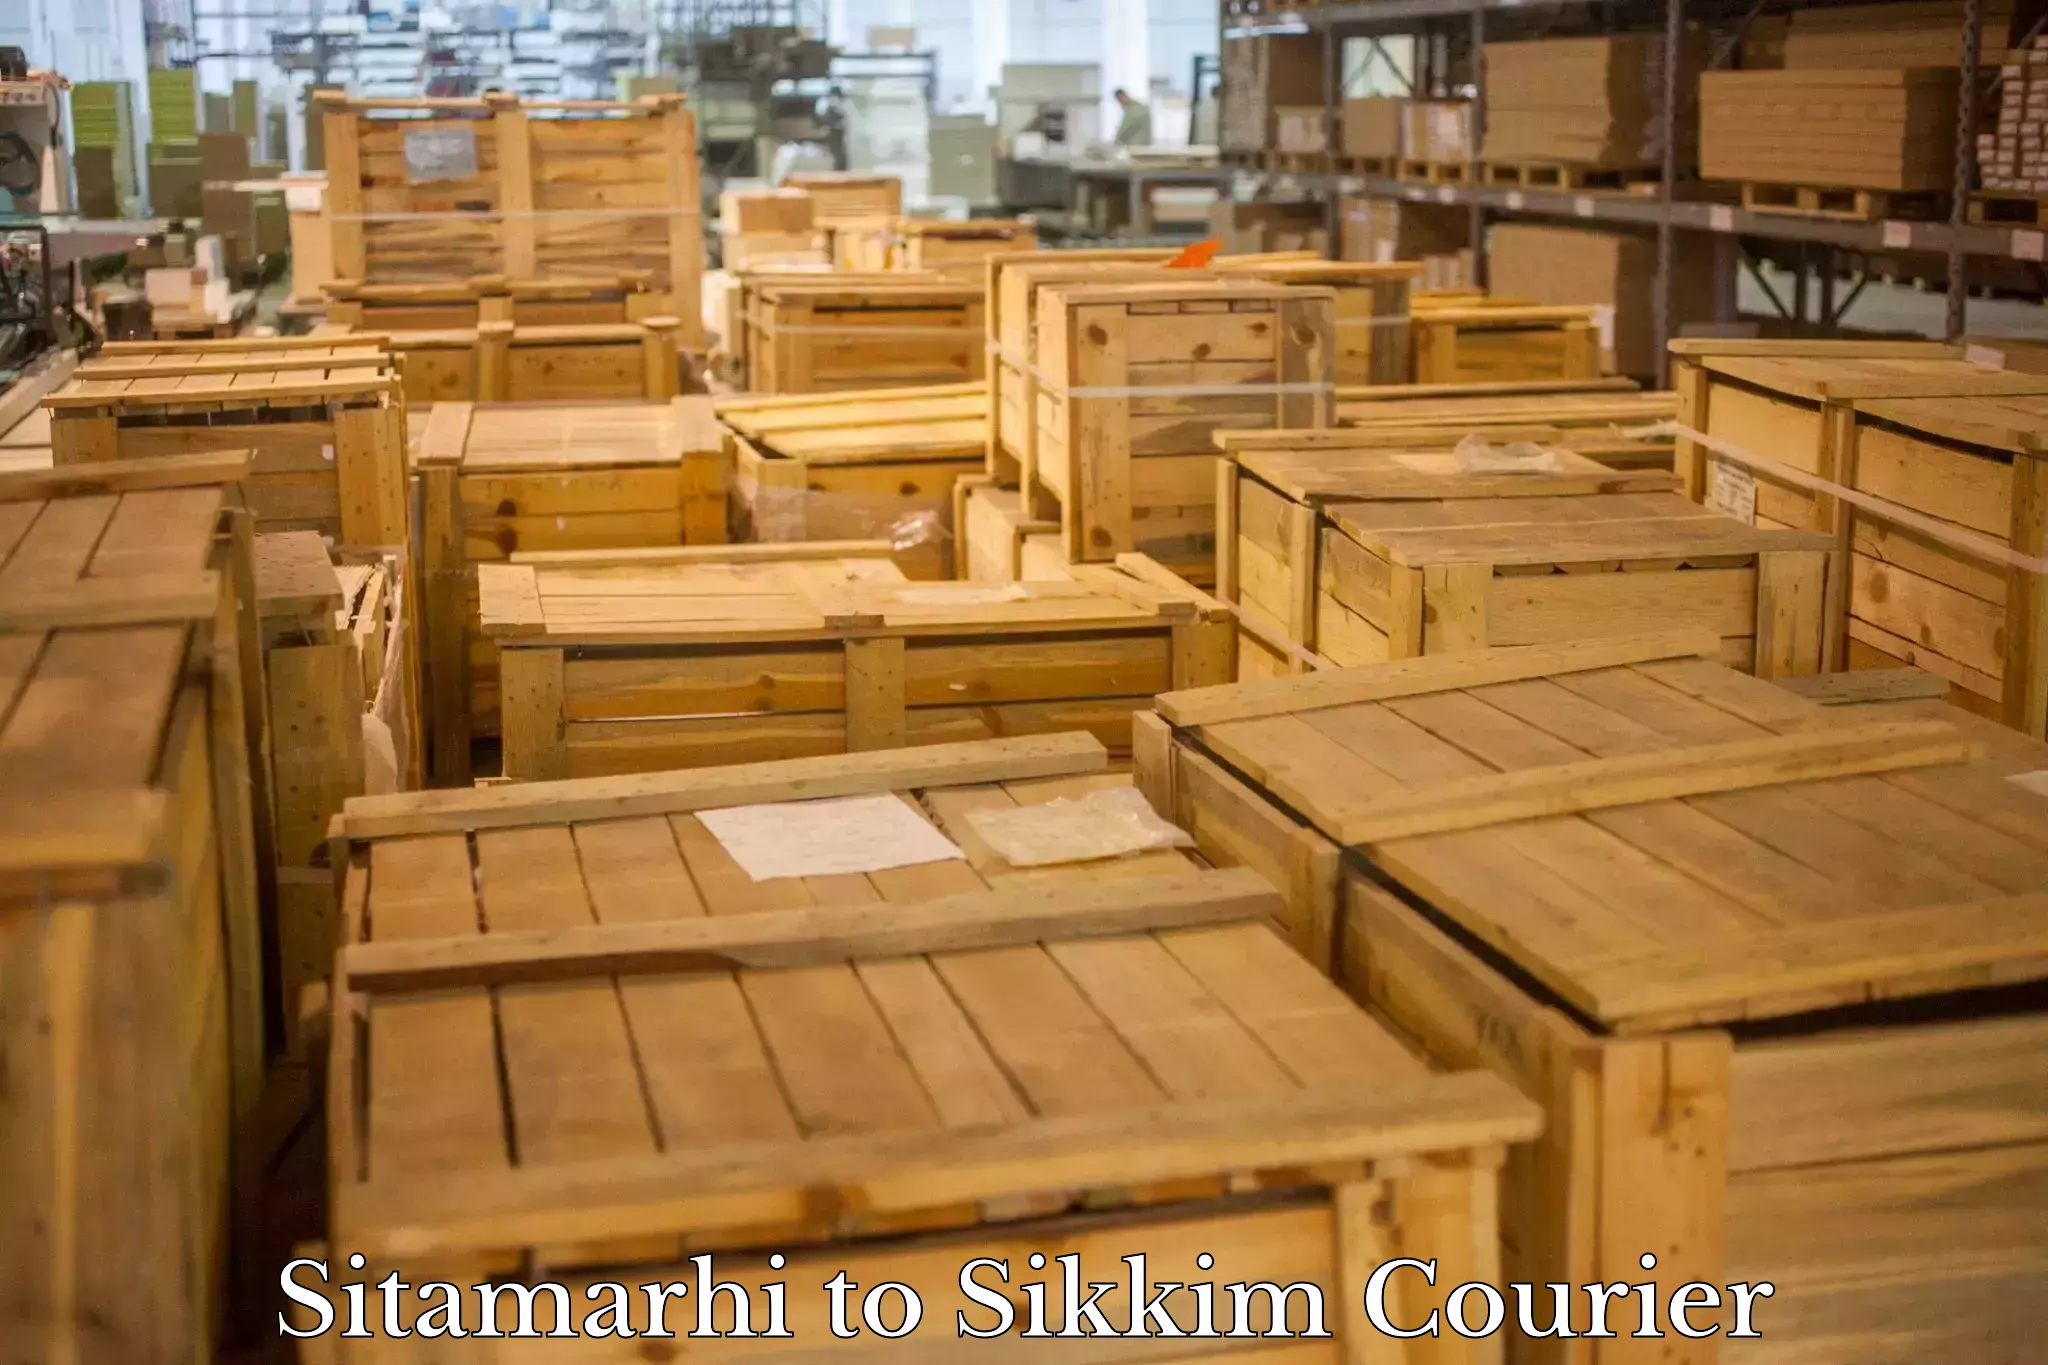 User-friendly delivery service Sitamarhi to Sikkim